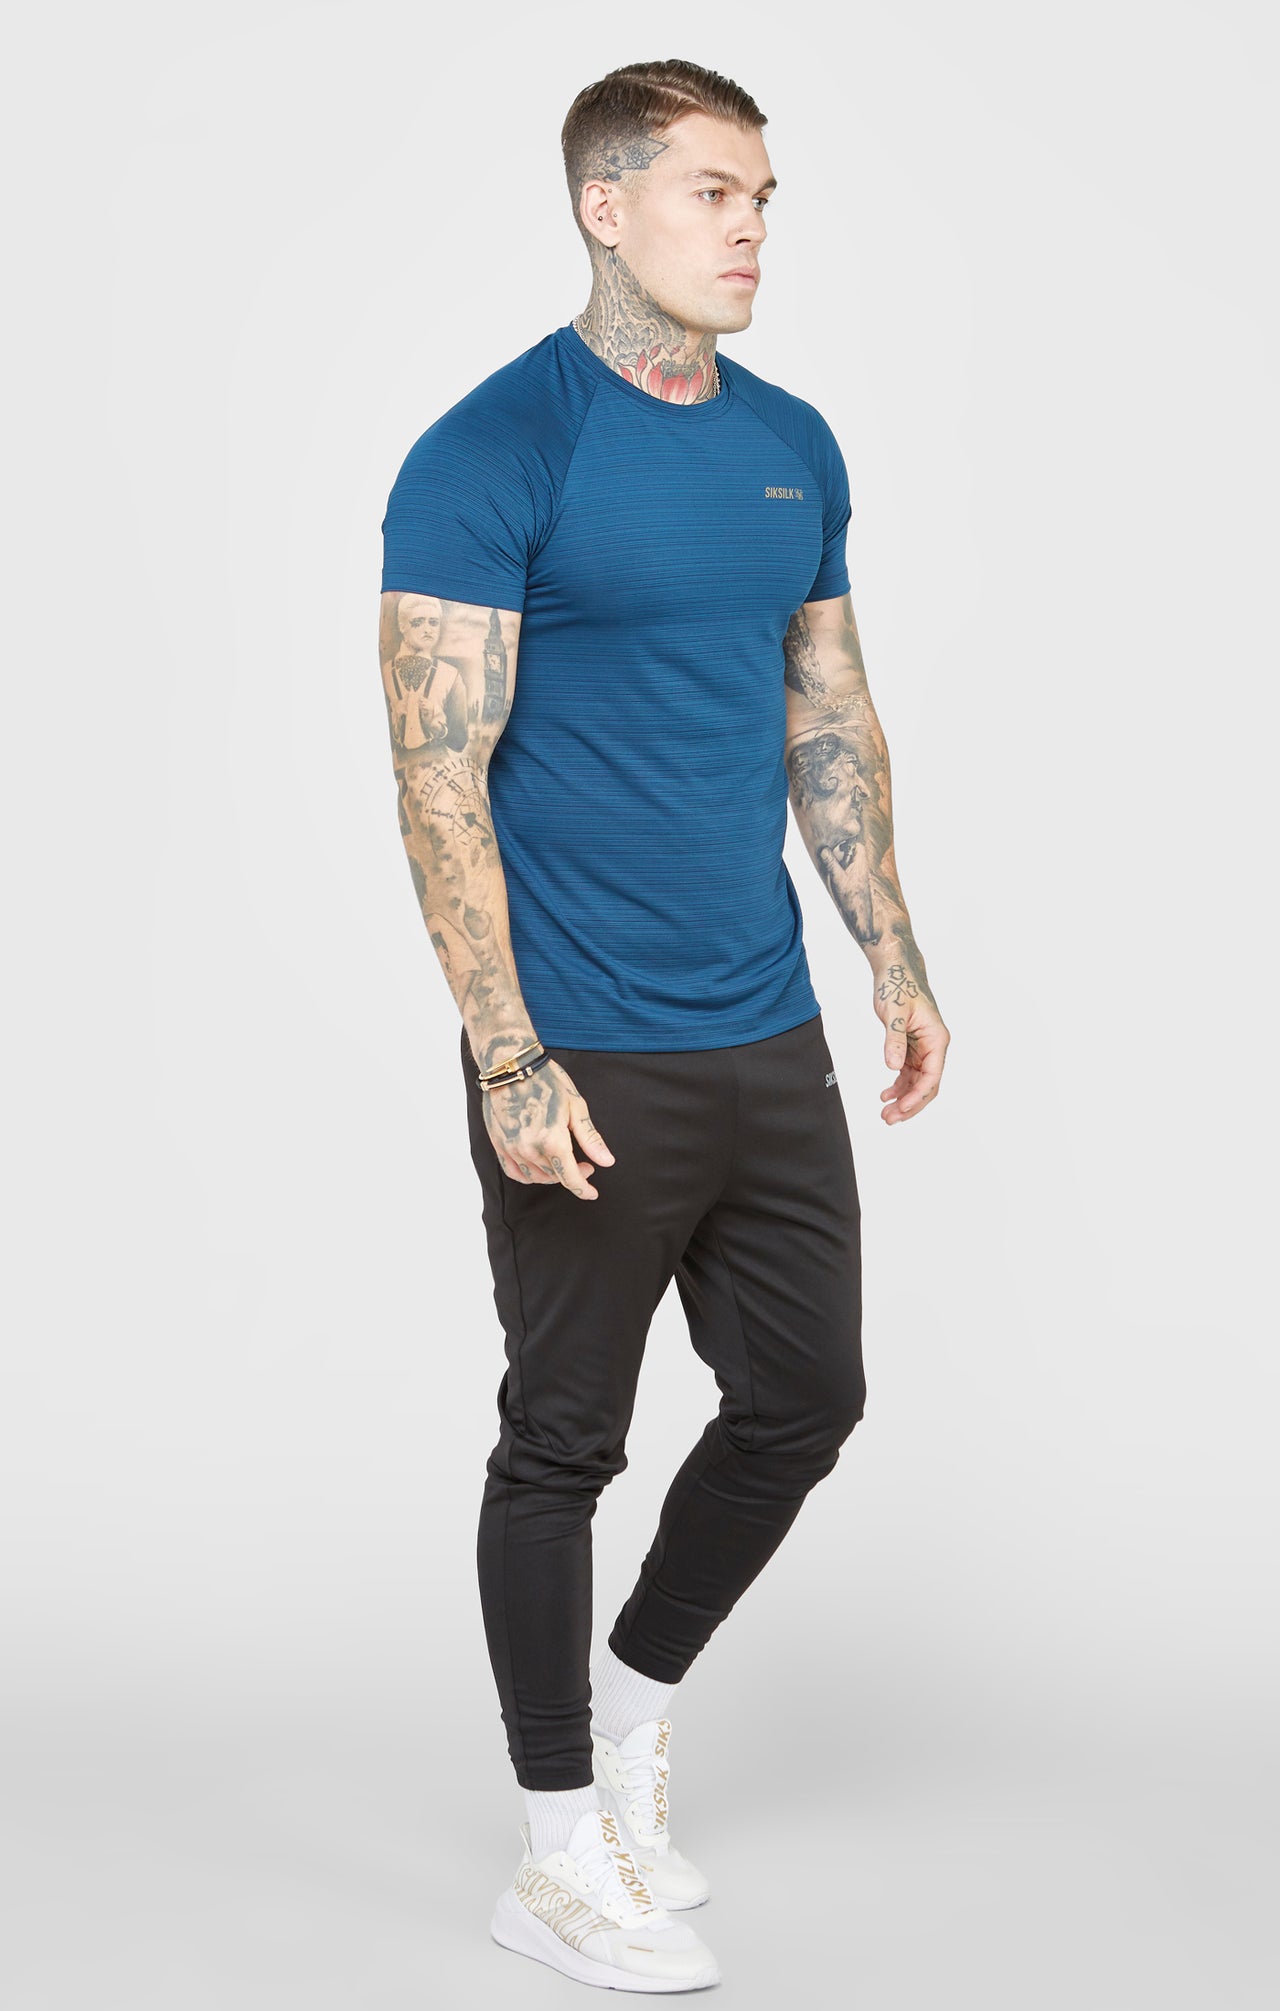 Teal Sports Textured Look T-Shirt (3)